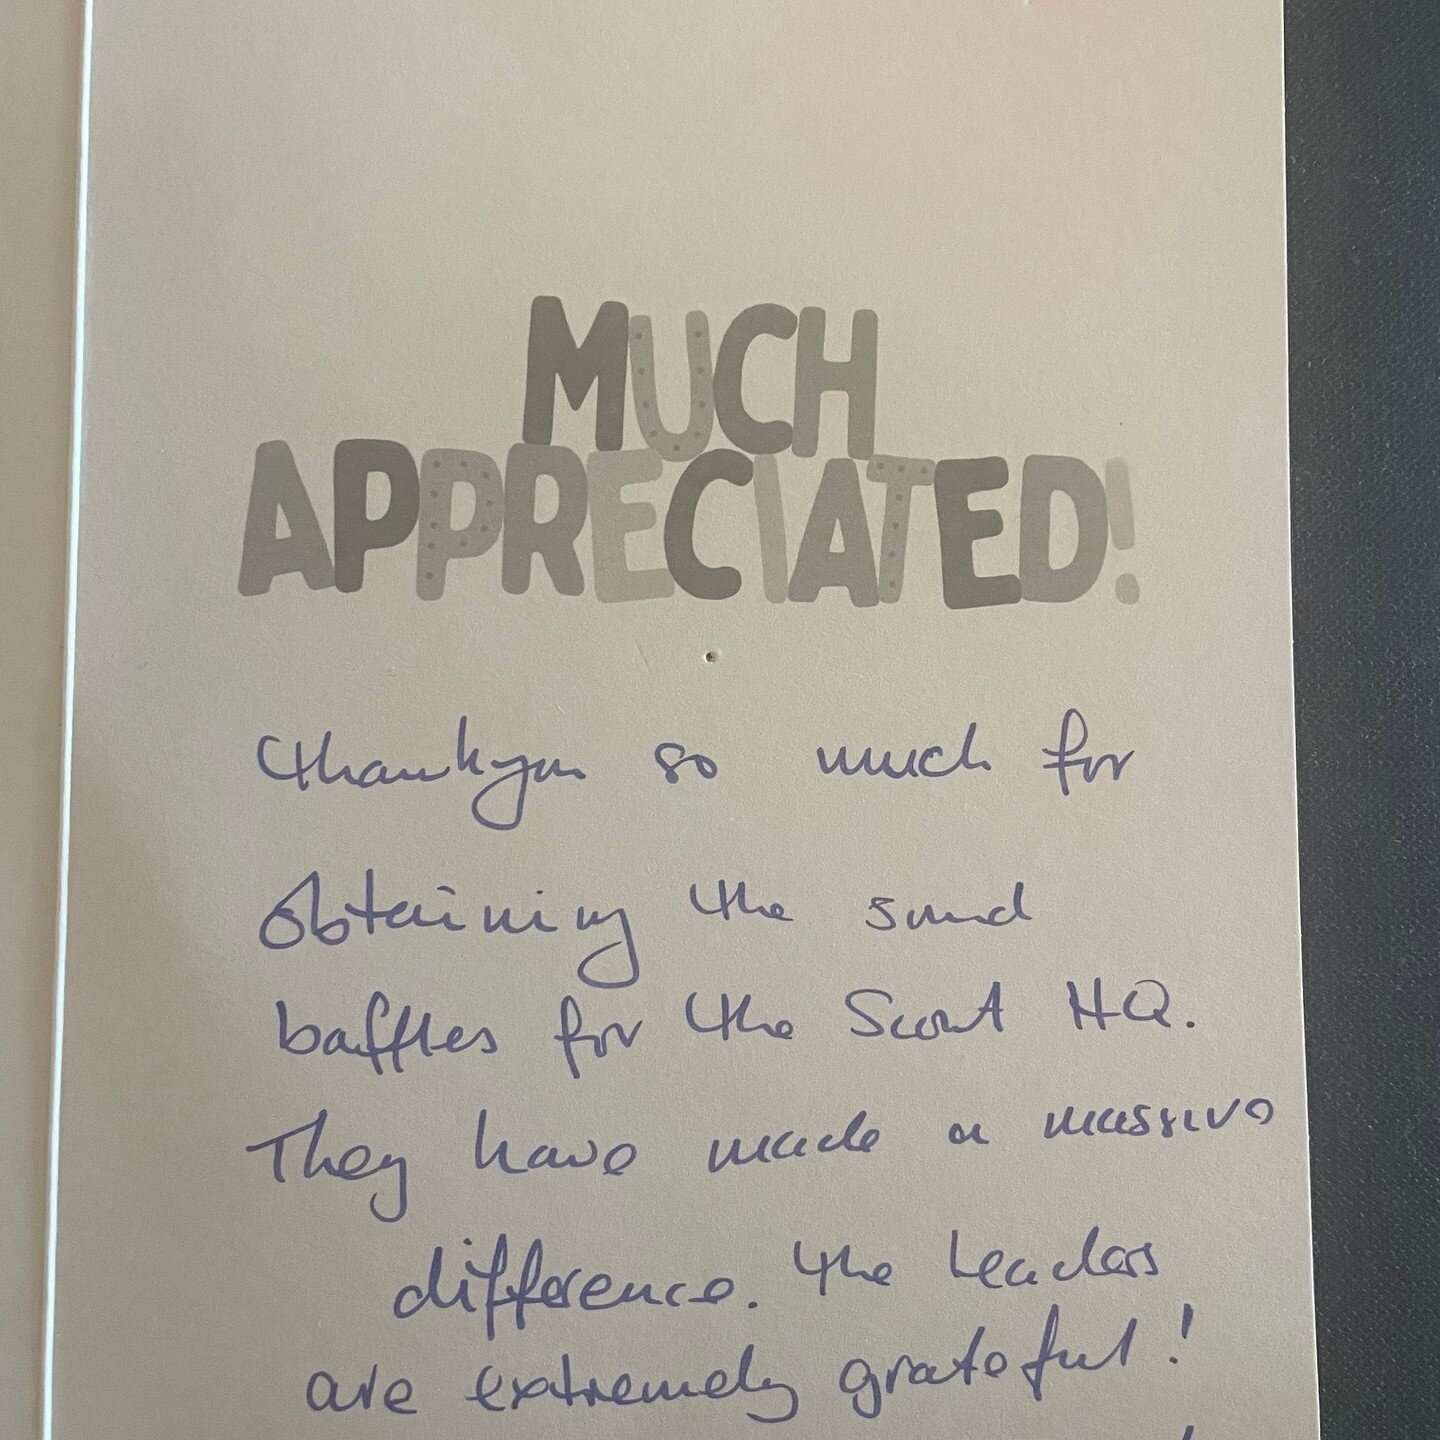 We are delighted we could make a difference. And a fantastic way to receive a review. The wonderful Denmead Scout Group sent this card to us, not only thanking us but saying that the acoustic products we installed, have made a huge difference - seems